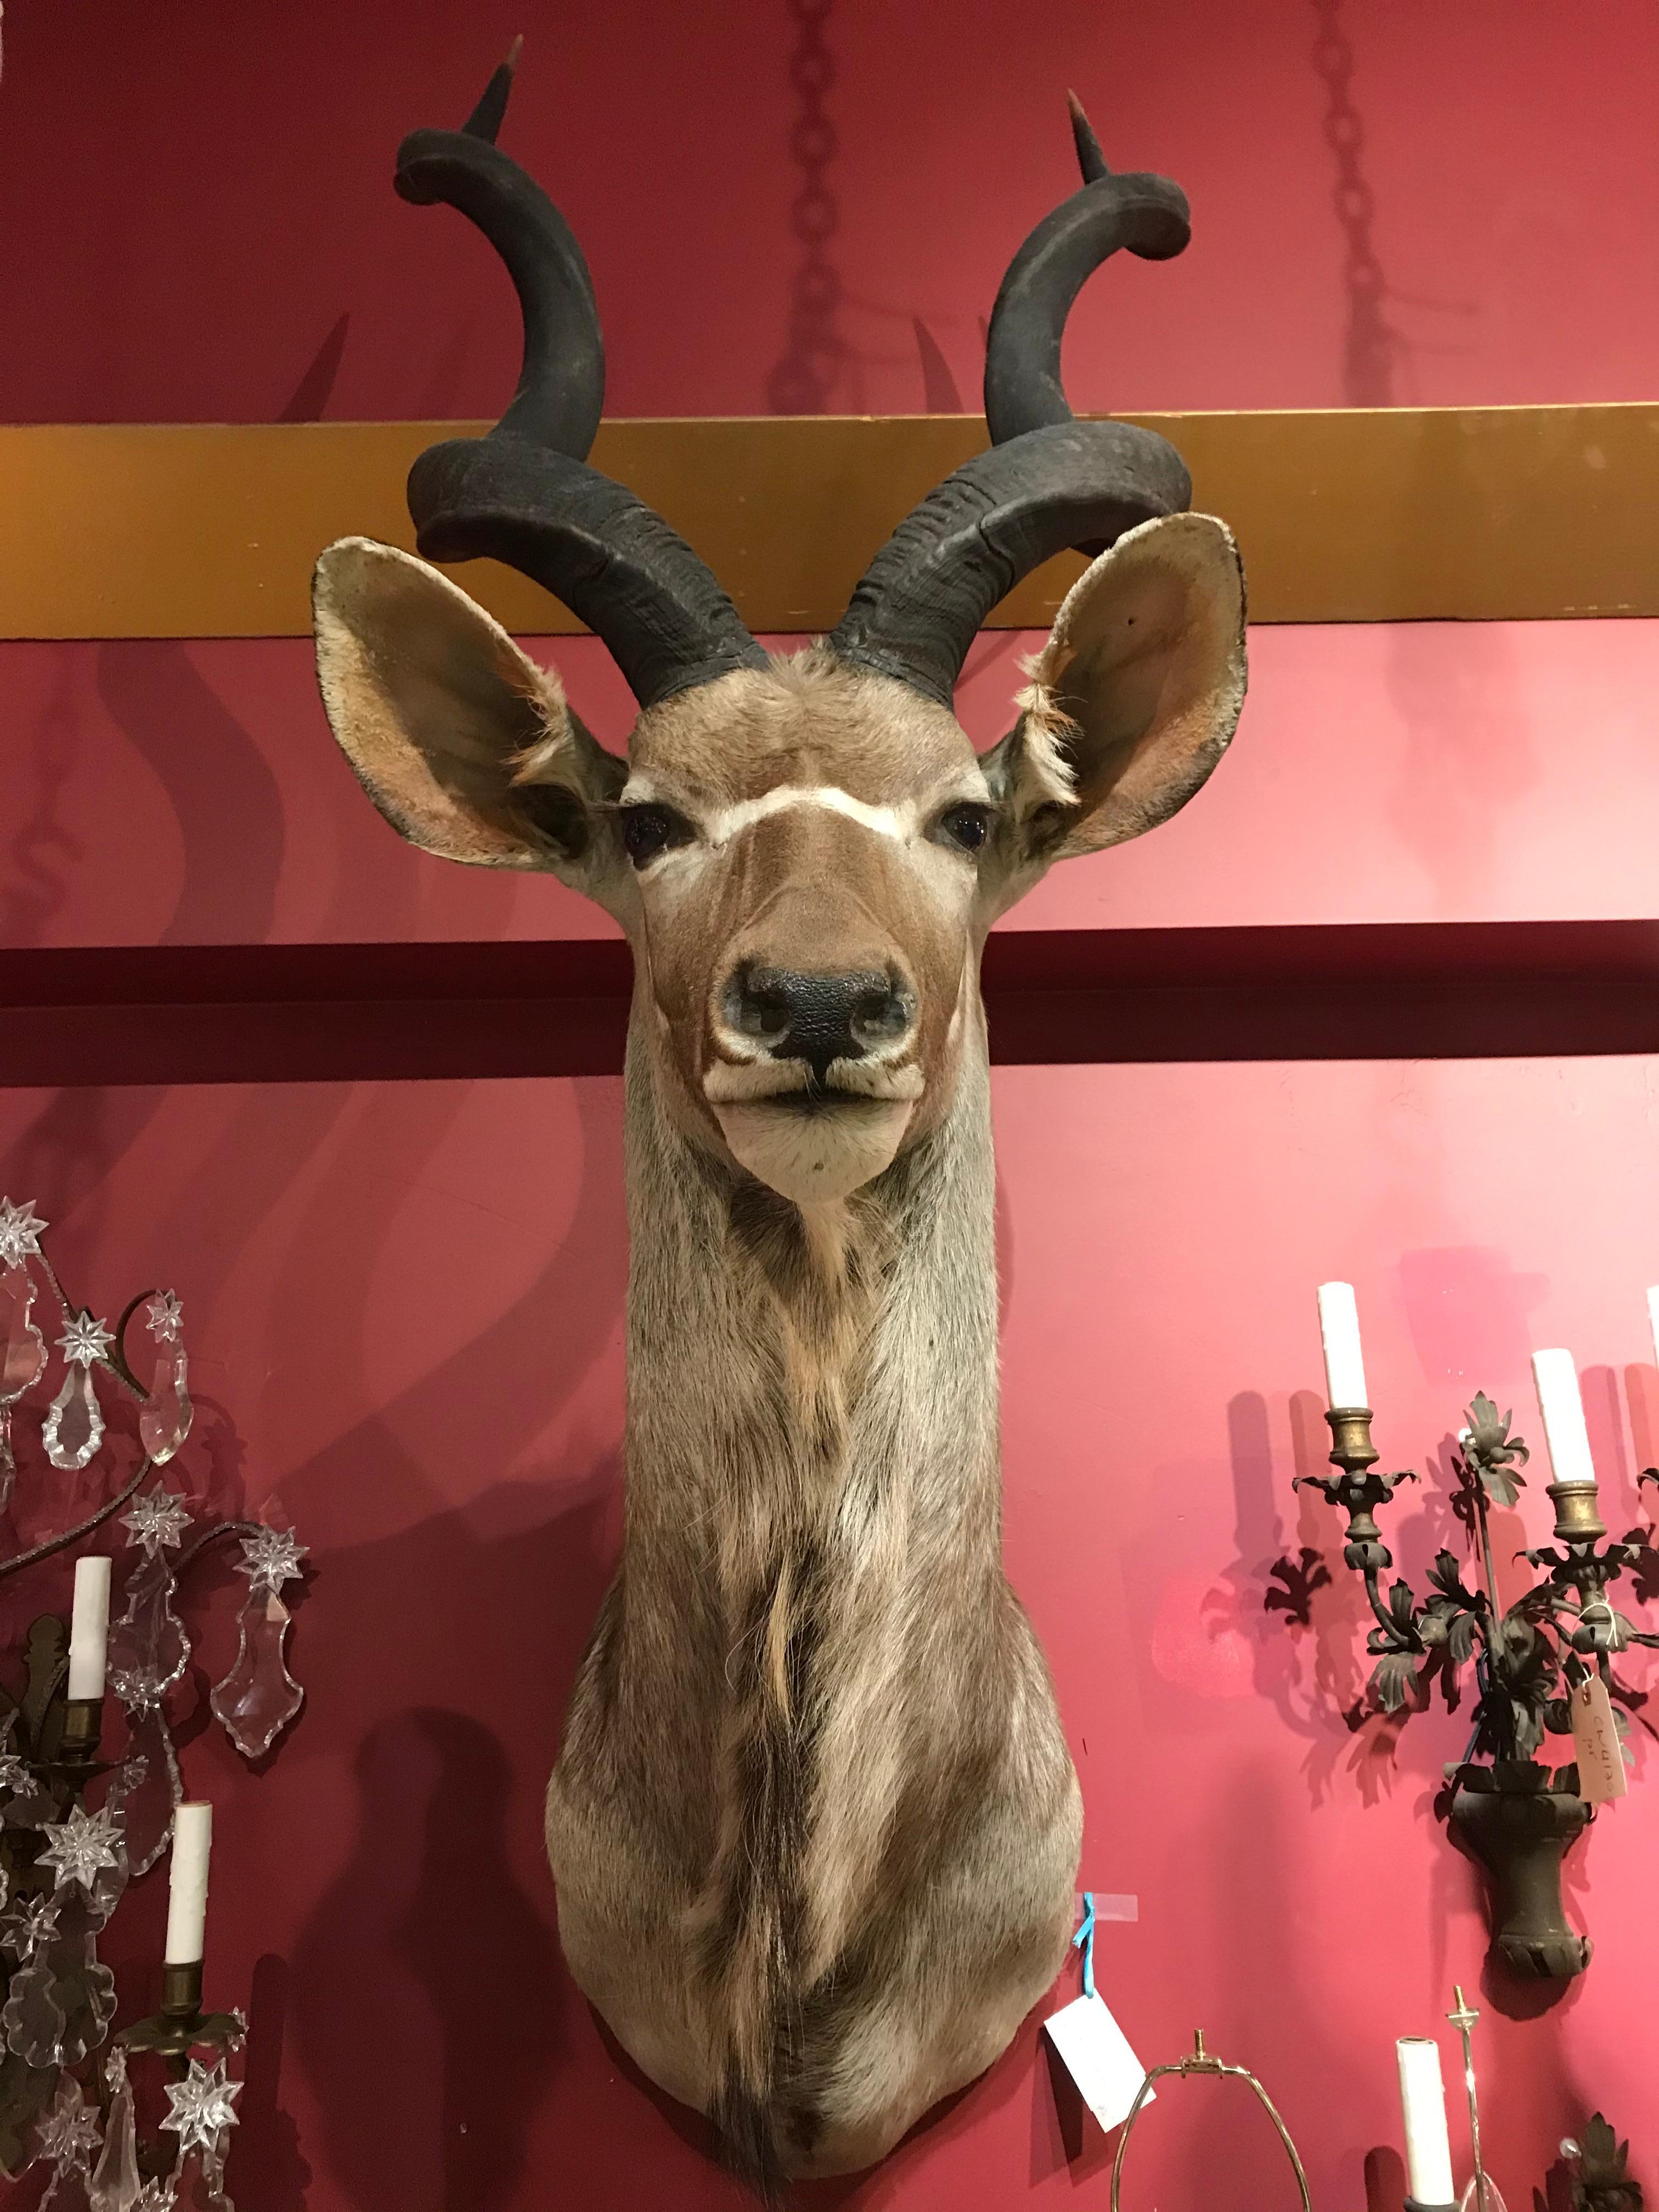 A superb taxidermy head of a greater kudo
Dimensions: Height 66